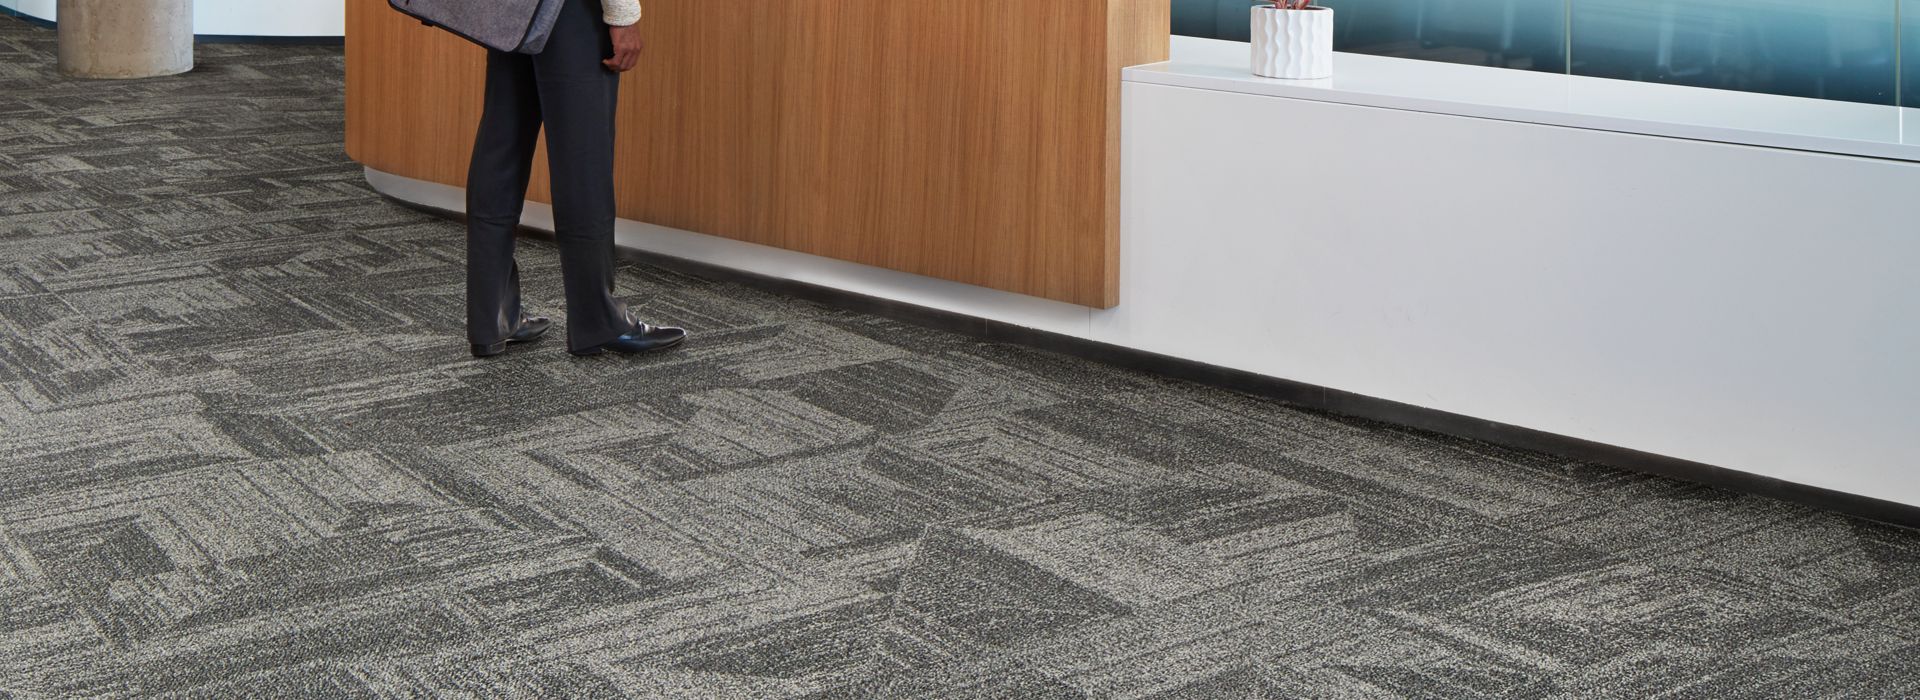 image Interface Open Air 403 carpet tile in front desk area with man speaking with woman numéro 1